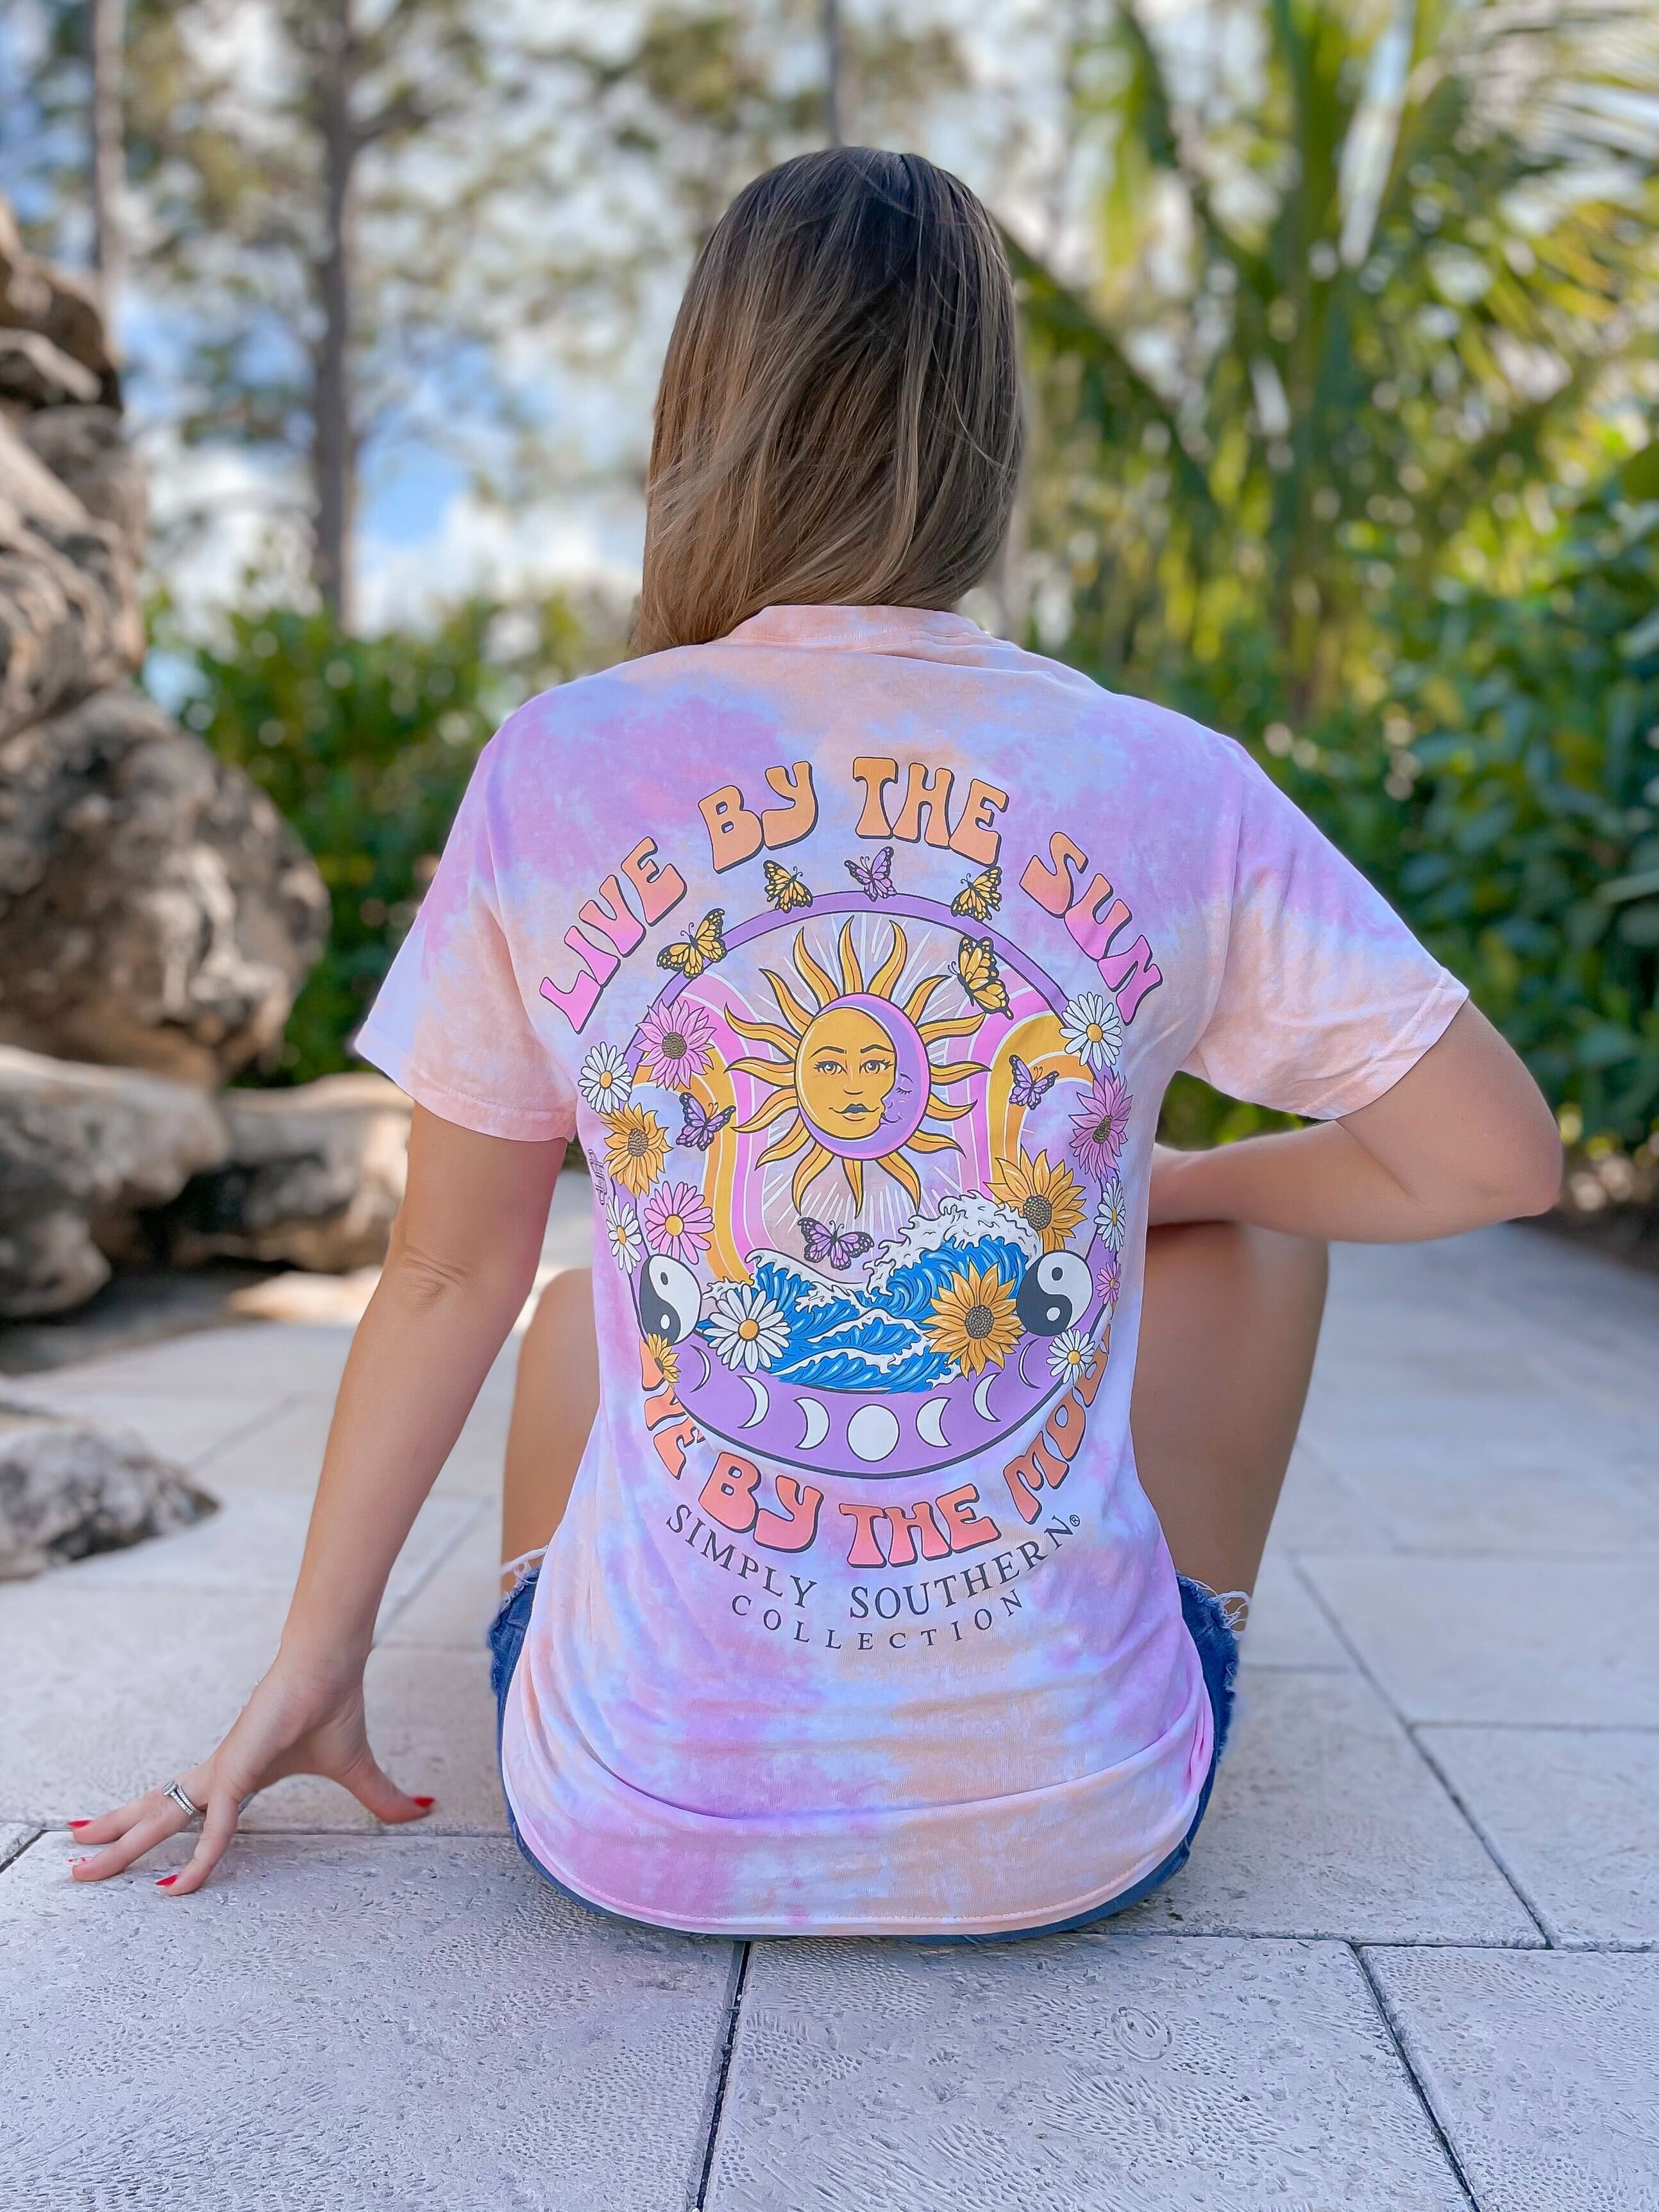 'Live By The Sun, Love By The Moon' Short Sleeve Tie Dye Tee by Simply Southern